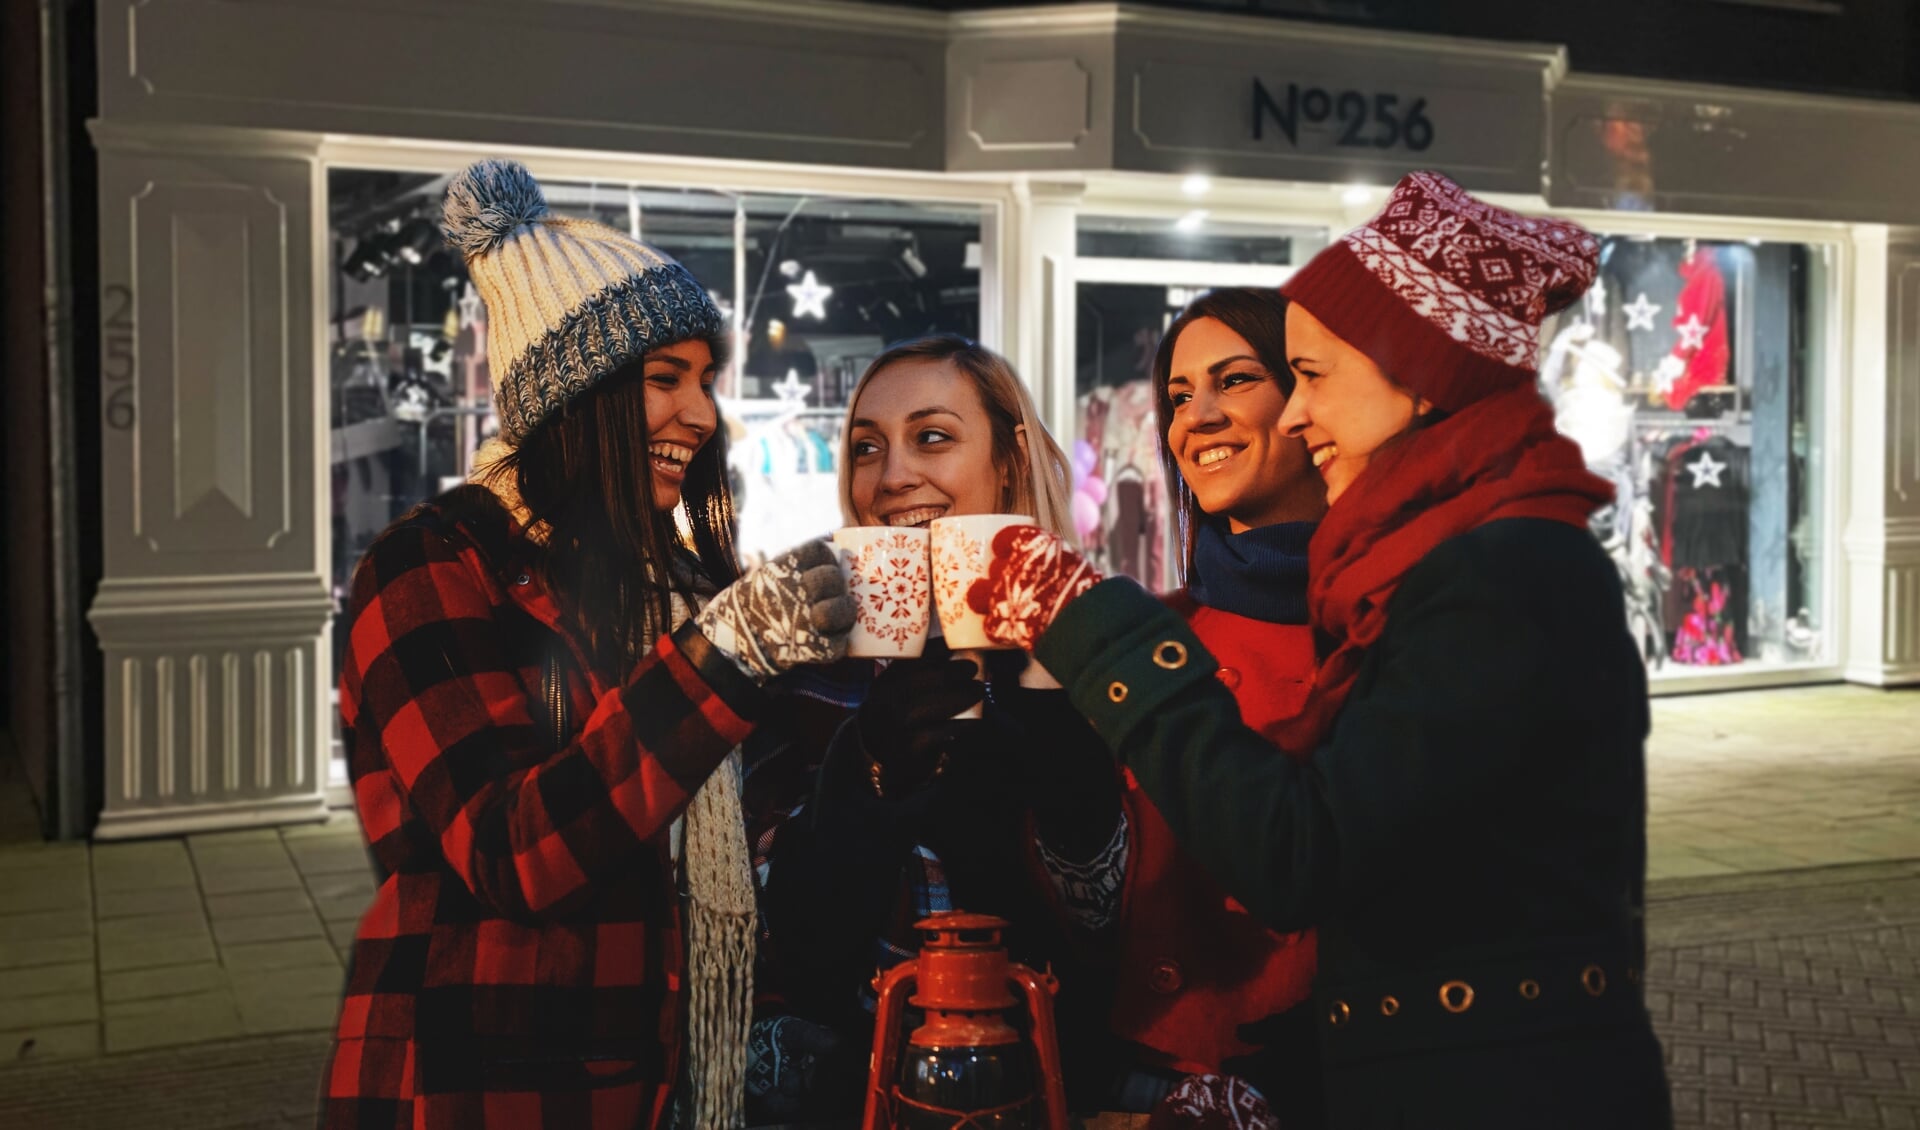 Group of friends enjoying the magic of Christmas by cheering with mulled wine and hot tea on a street at a city decorated with Christmas lights.